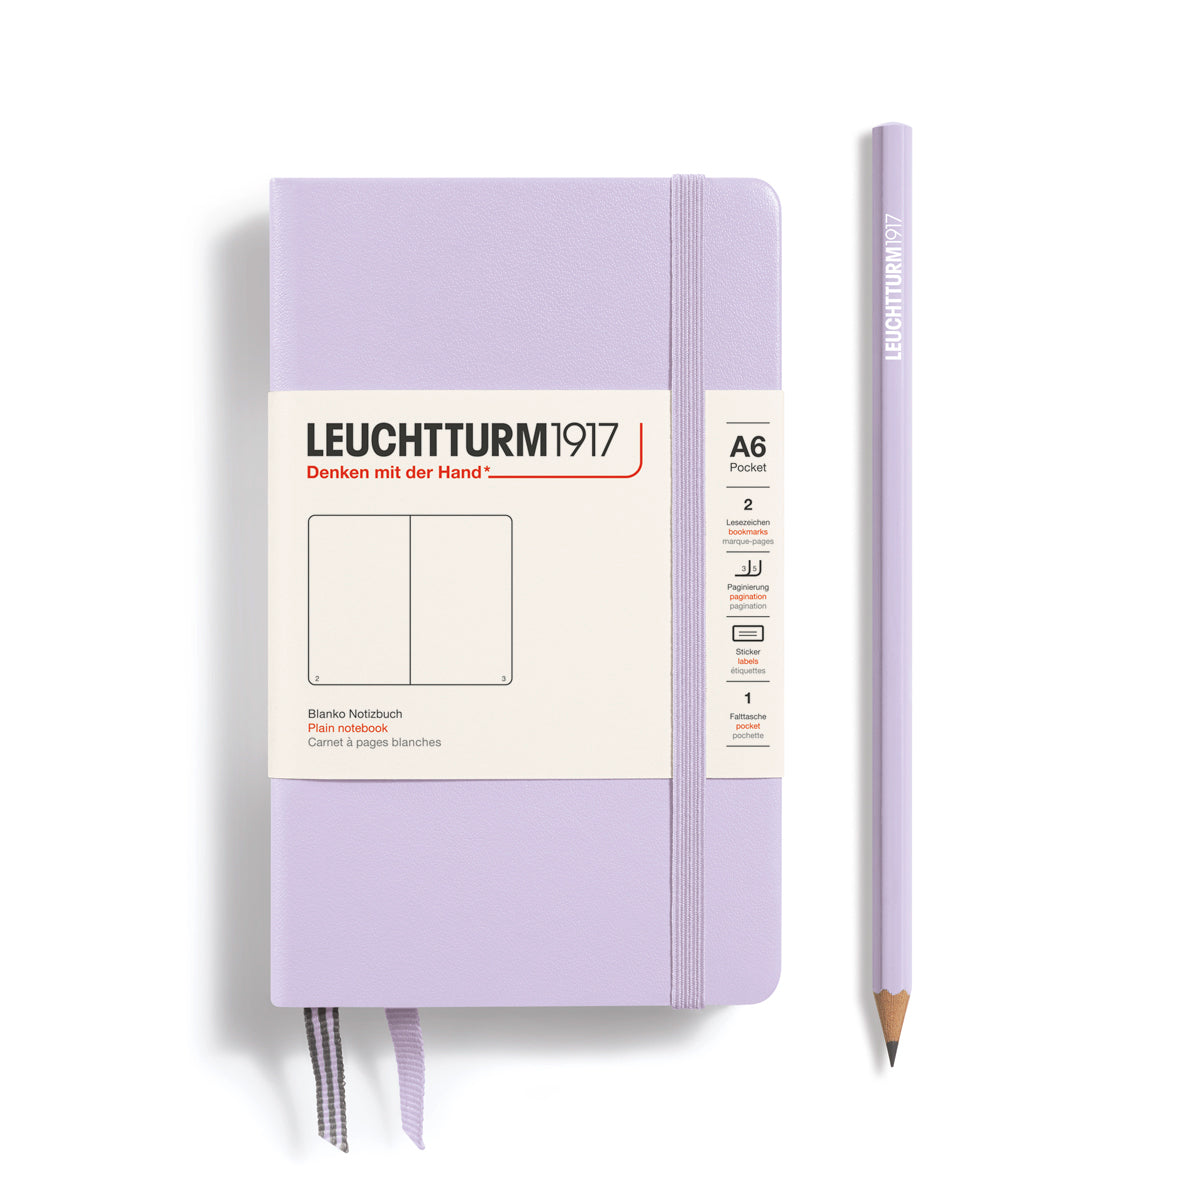 Leuchtturm1917 Notebook A6 Pocket Hardcover in lilac and plain ruling from penny black